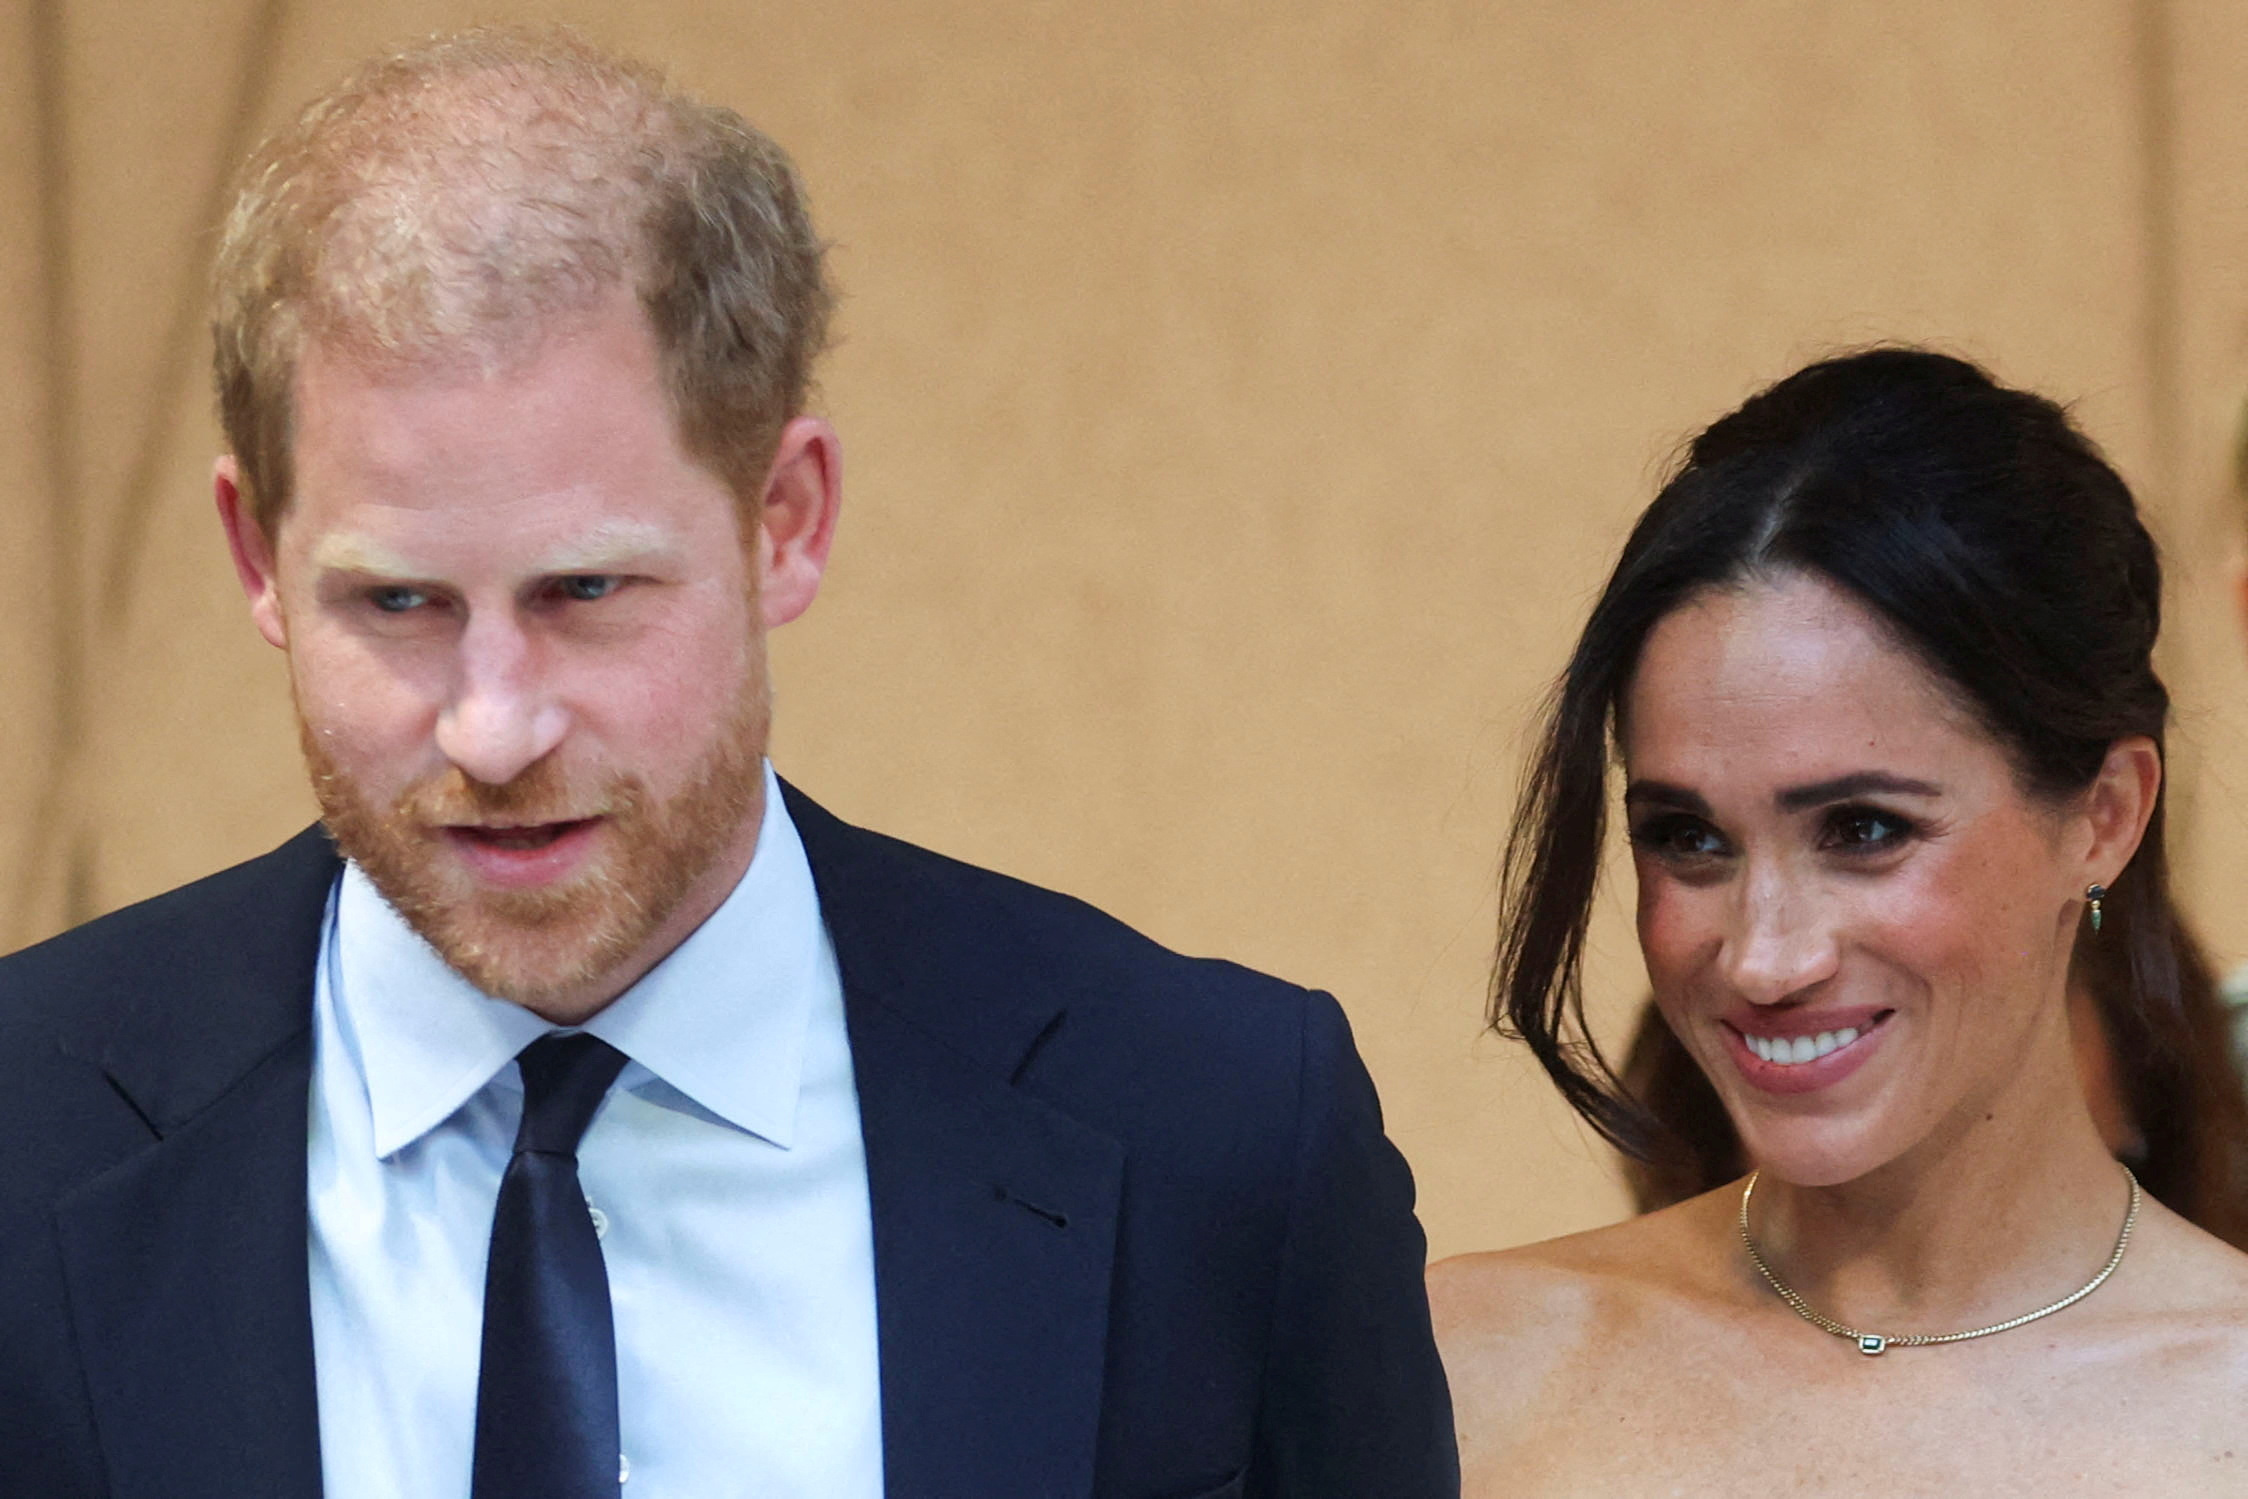 Prince Harry, Meghan Markle advised to 'put the past behind them'
